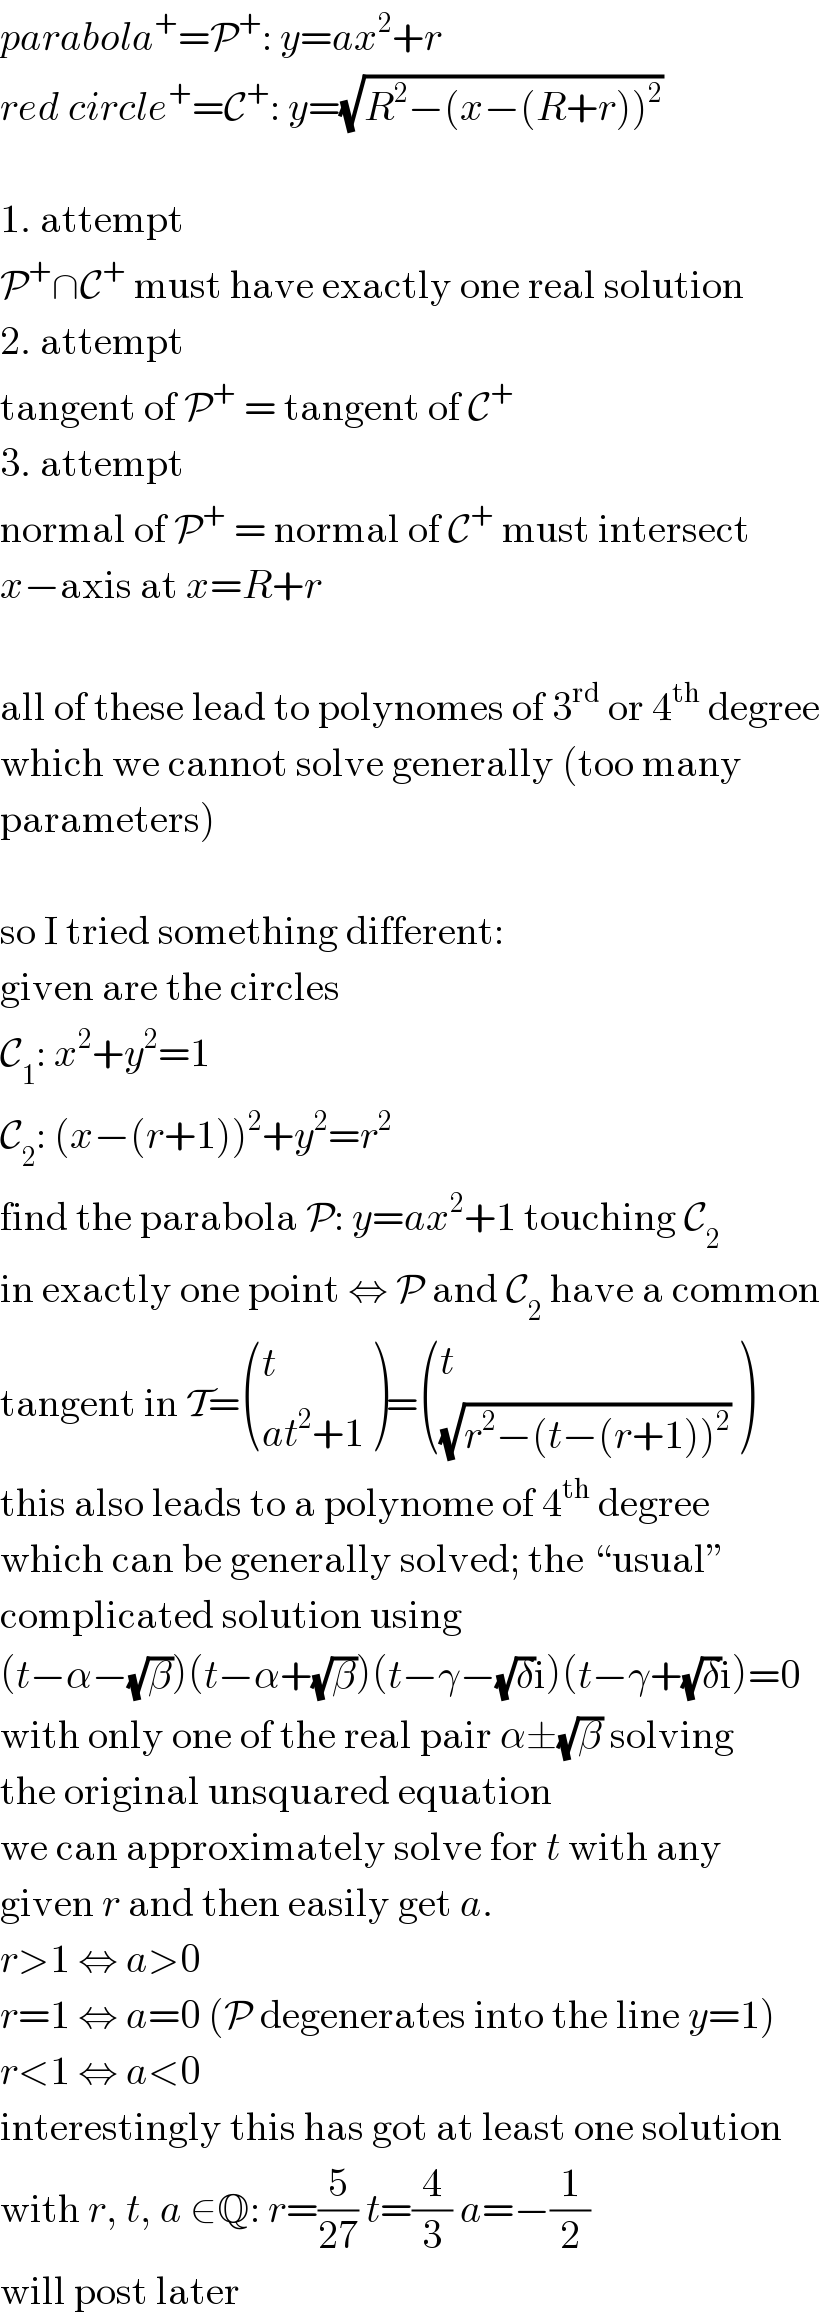 parabola^+ =P^+ : y=ax^2 +r  red circle^+ =C^+ : y=(√(R^2 −(x−(R+r))^2 ))    1. attempt  P^+ ∩C^+  must have exactly one real solution  2. attempt  tangent of P^+  = tangent of C^+   3. attempt  normal of P^+  = normal of C^+  must intersect  x−axis at x=R+r    all of these lead to polynomes of 3^(rd)  or 4^(th)  degree  which we cannot solve generally (too many  parameters)    so I tried something different:  given are the circles  C_1 : x^2 +y^2 =1  C_2 : (x−(r+1))^2 +y^2 =r^2   find the parabola P: y=ax^2 +1 touching C_2   in exactly one point ⇔ P and C_2  have a common  tangent in T= ((t),((at^2 +1)) )= ((t),((√(r^2 −(t−(r+1))^2 ))) )  this also leads to a polynome of 4^(th)  degree  which can be generally solved; the “usual”  complicated solution using  (t−α−(√β))(t−α+(√β))(t−γ−(√δ)i)(t−γ+(√δ)i)=0  with only one of the real pair α±(√β) solving  the original unsquared equation  we can approximately solve for t with any  given r and then easily get a.  r>1 ⇔ a>0  r=1 ⇔ a=0 (P degenerates into the line y=1)  r<1 ⇔ a<0  interestingly this has got at least one solution  with r, t, a ∈Q: r=(5/(27)) t=(4/3) a=−(1/2)  will post later  